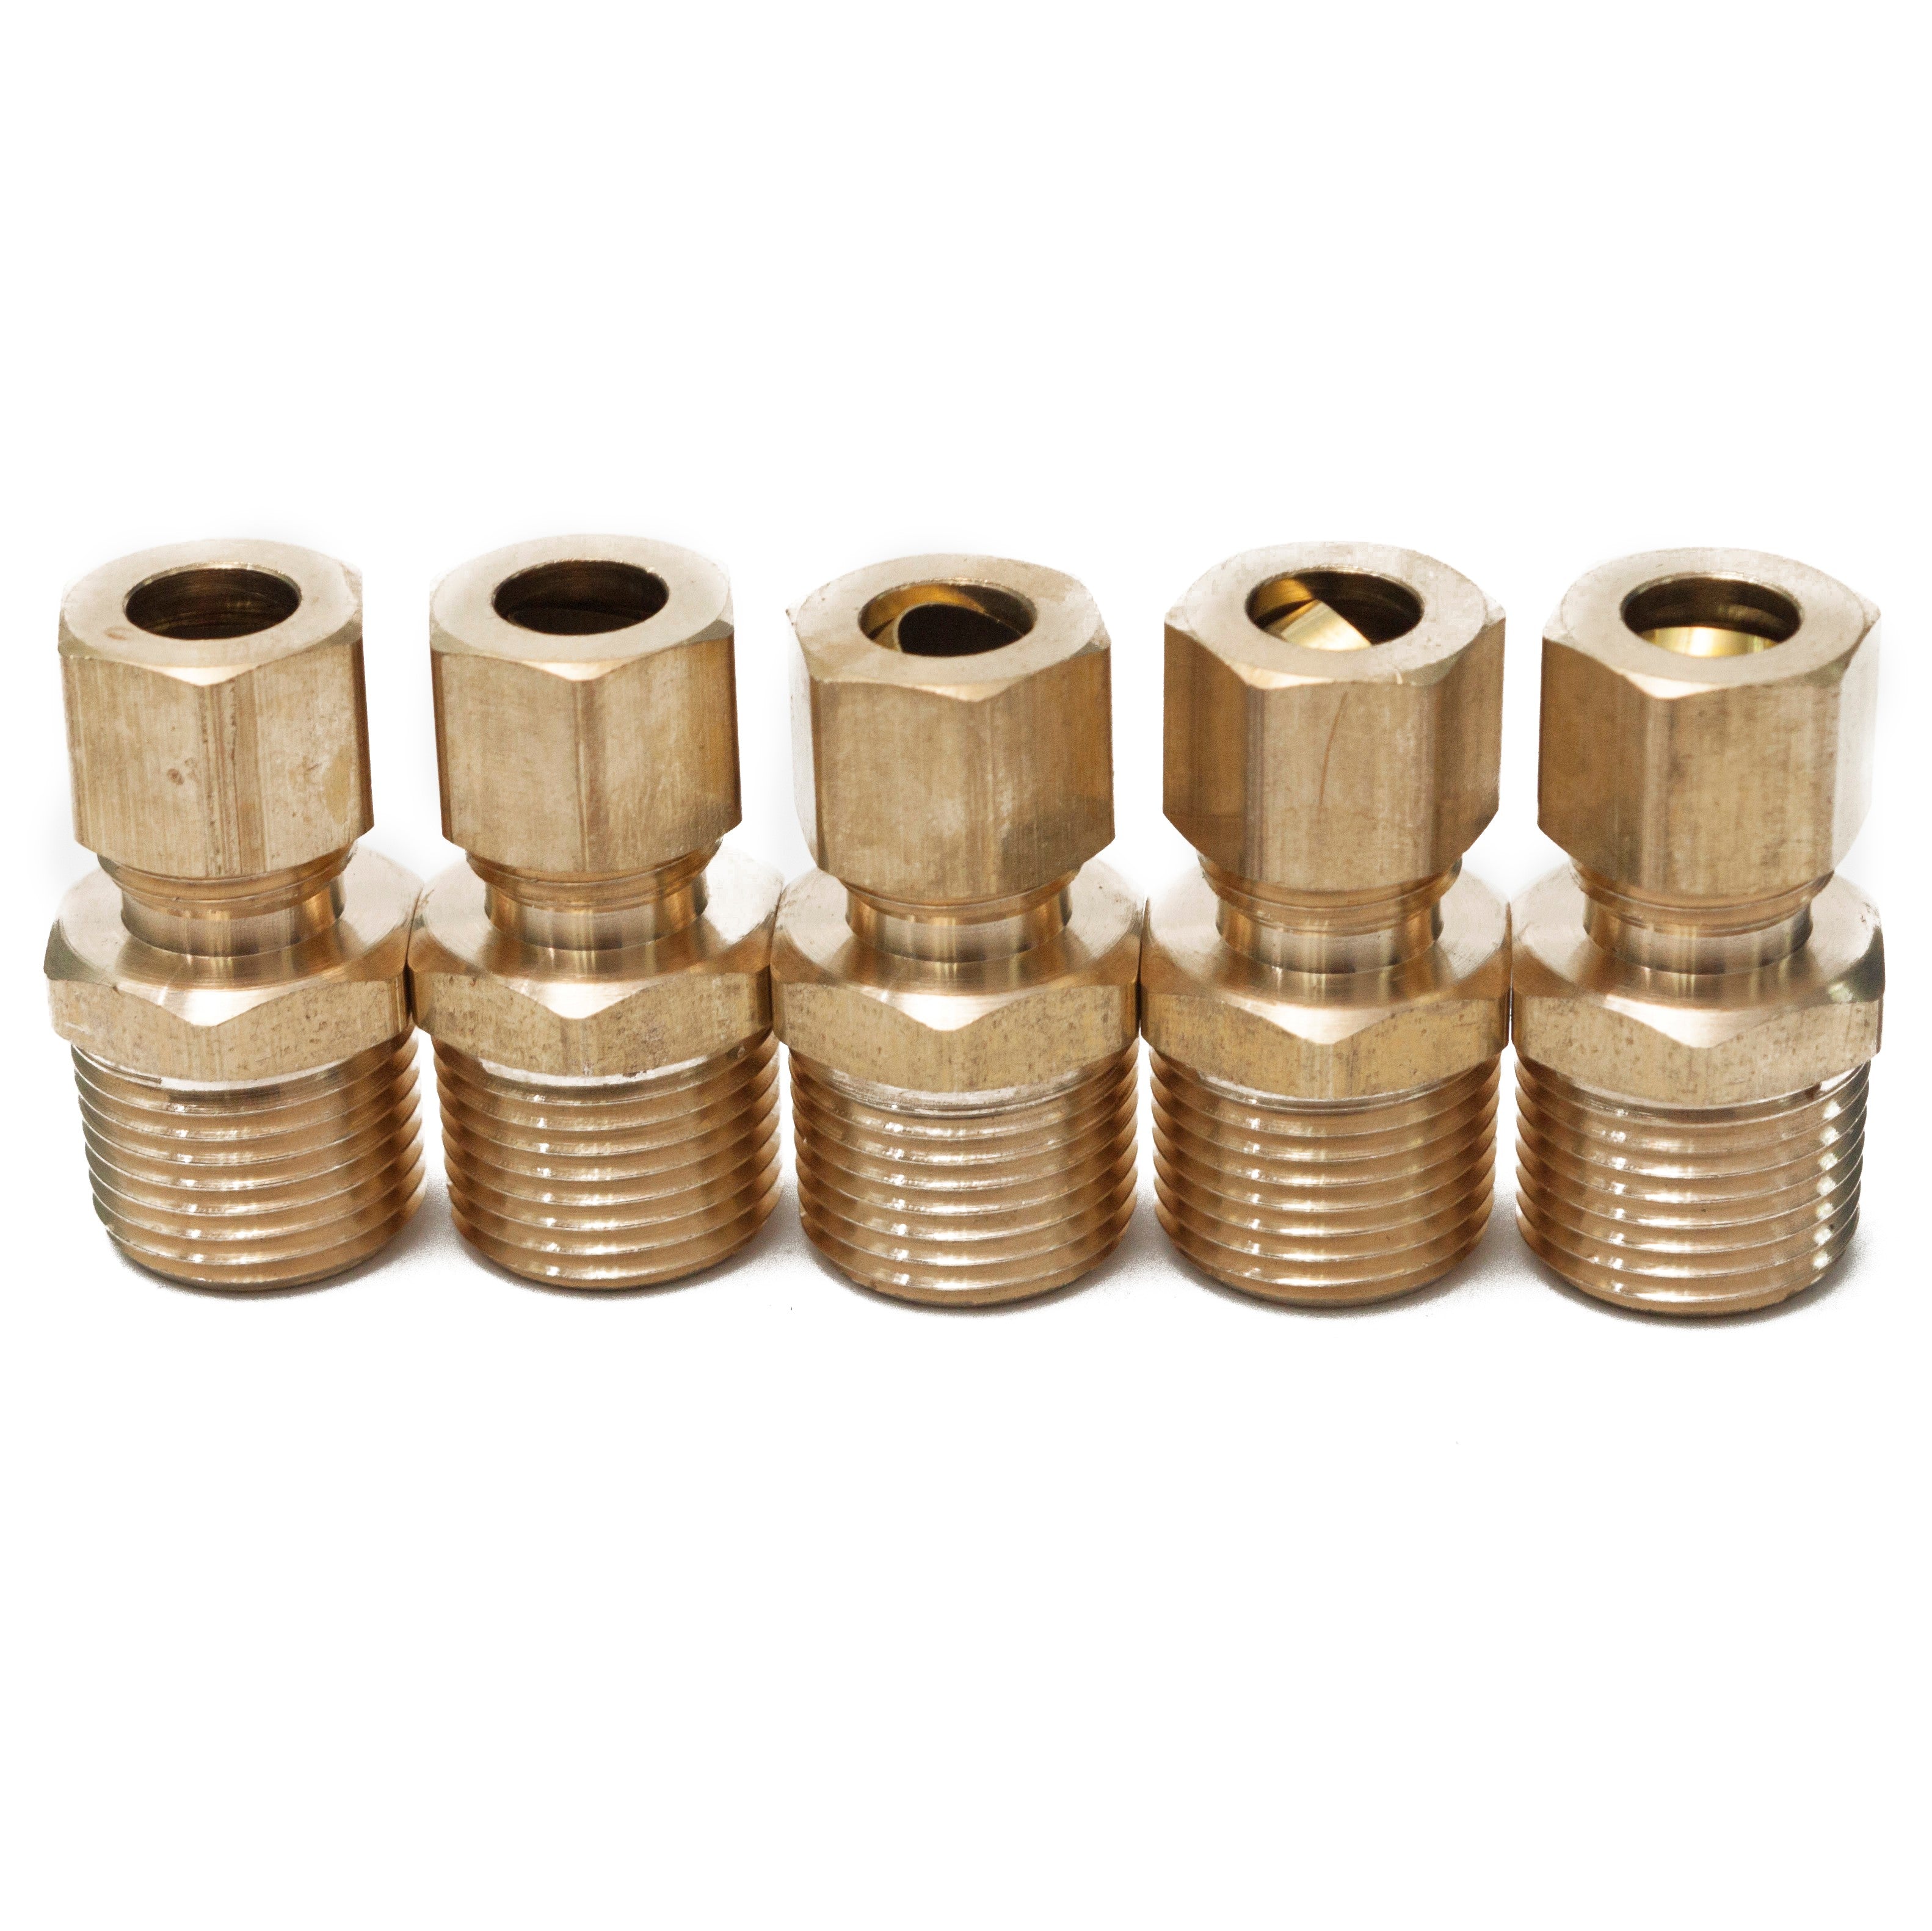 LTWFITTING Brass 5/16 OD x 3/8 Male NPT Compression Connector Fitting(Pack of 5)